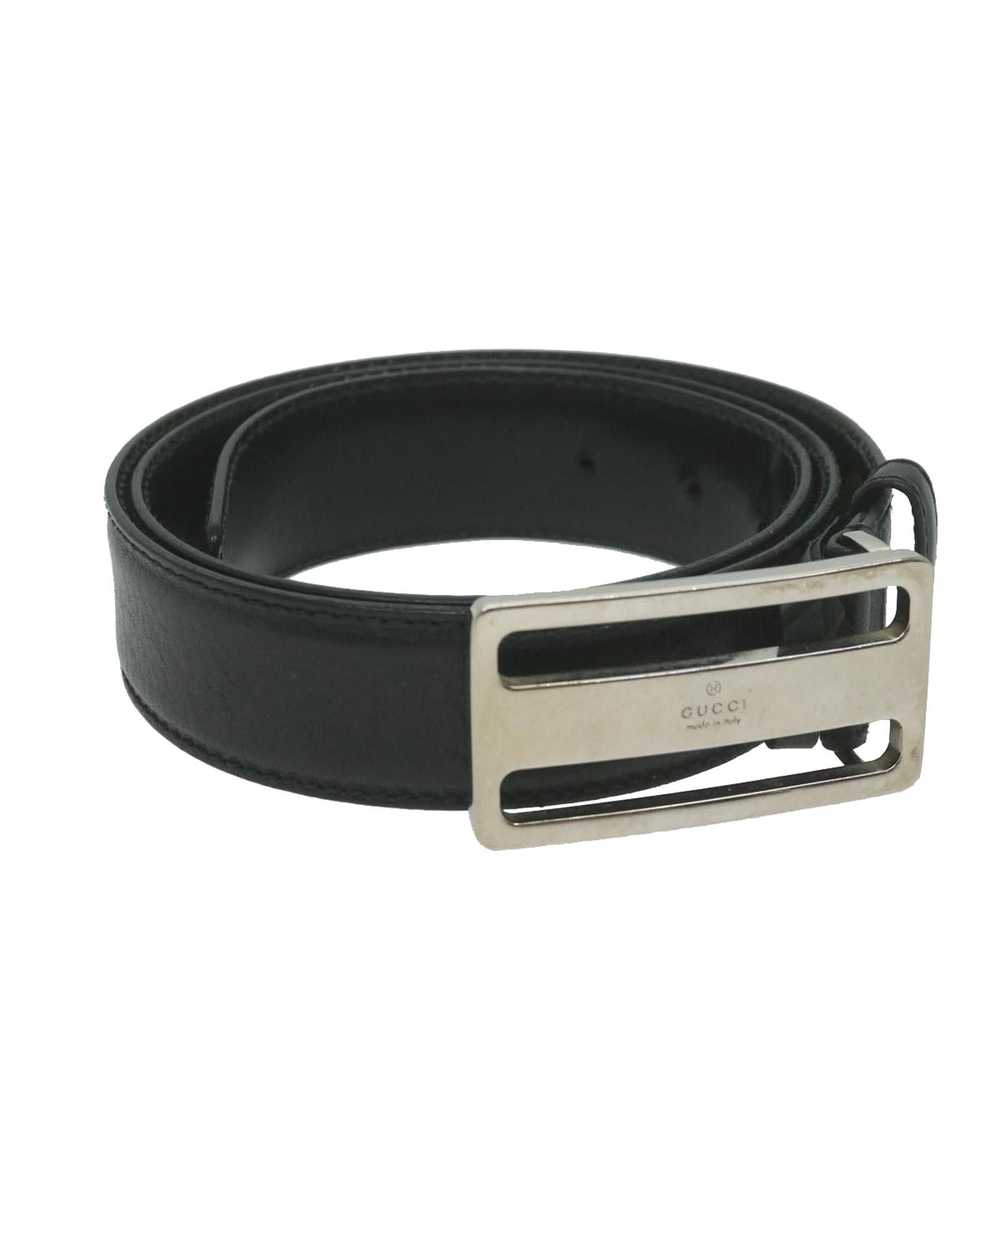 Gucci Premium Black Leather Belt with Timeless Ap… - image 1